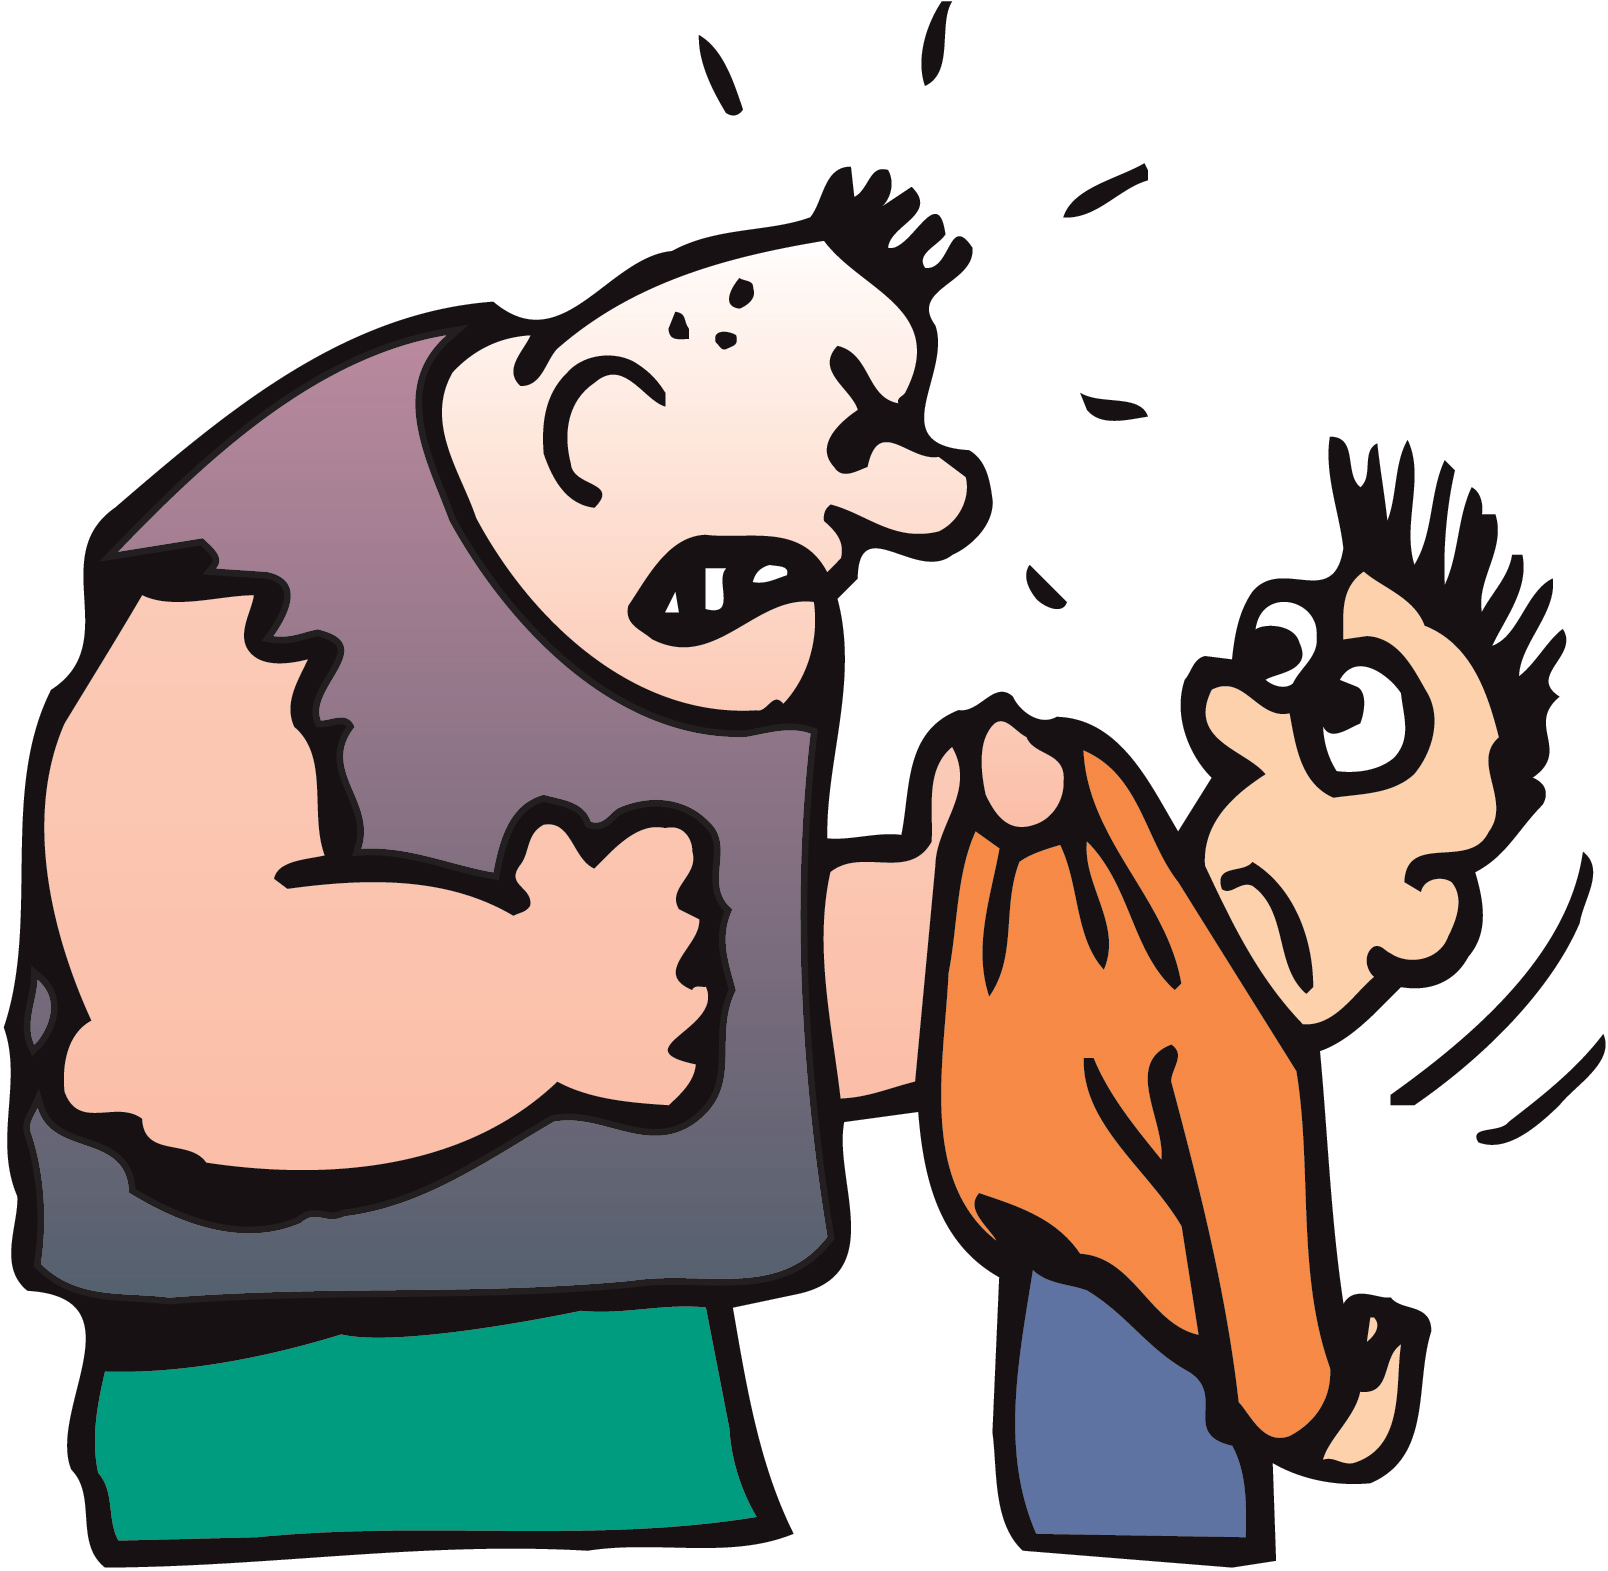 Cartoon Pictures Of Bullies - ClipArt Best